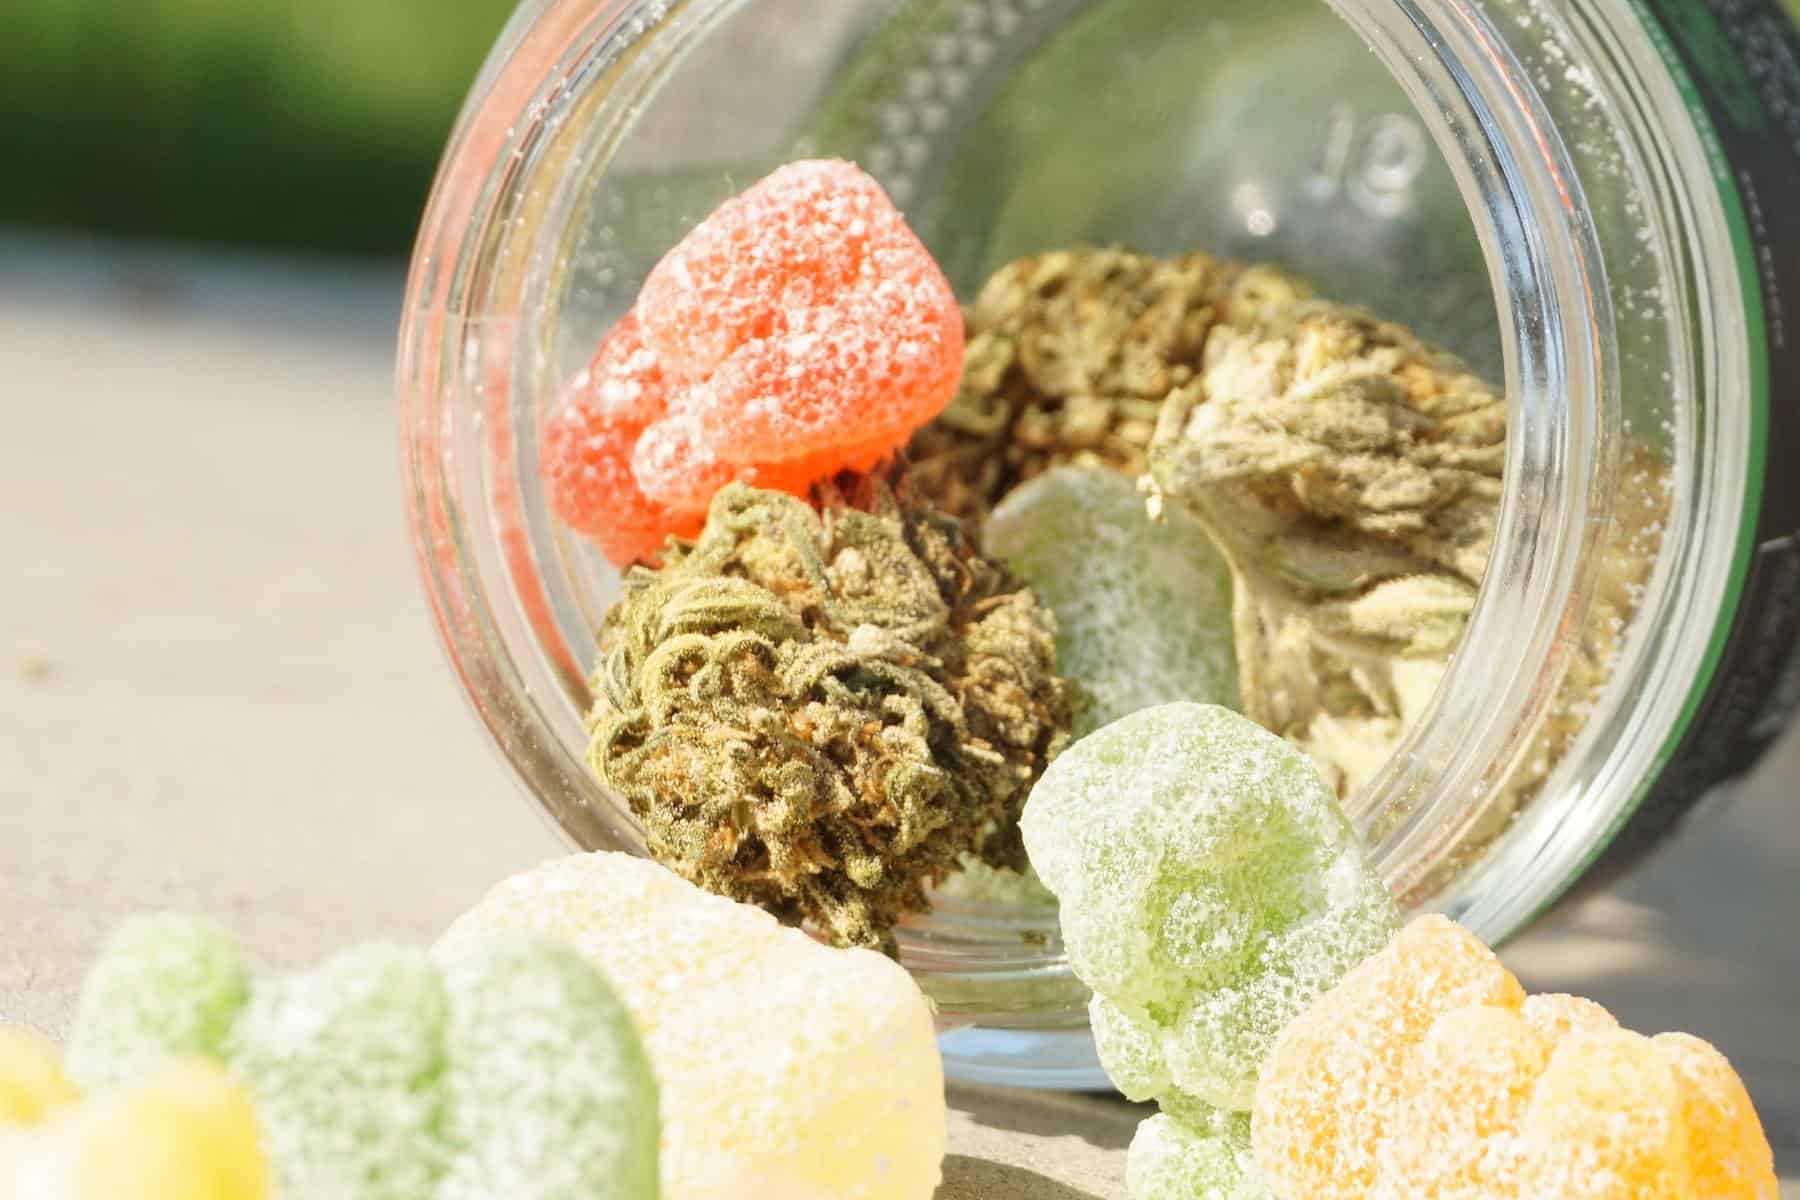 gummies and weed coming out of a jar